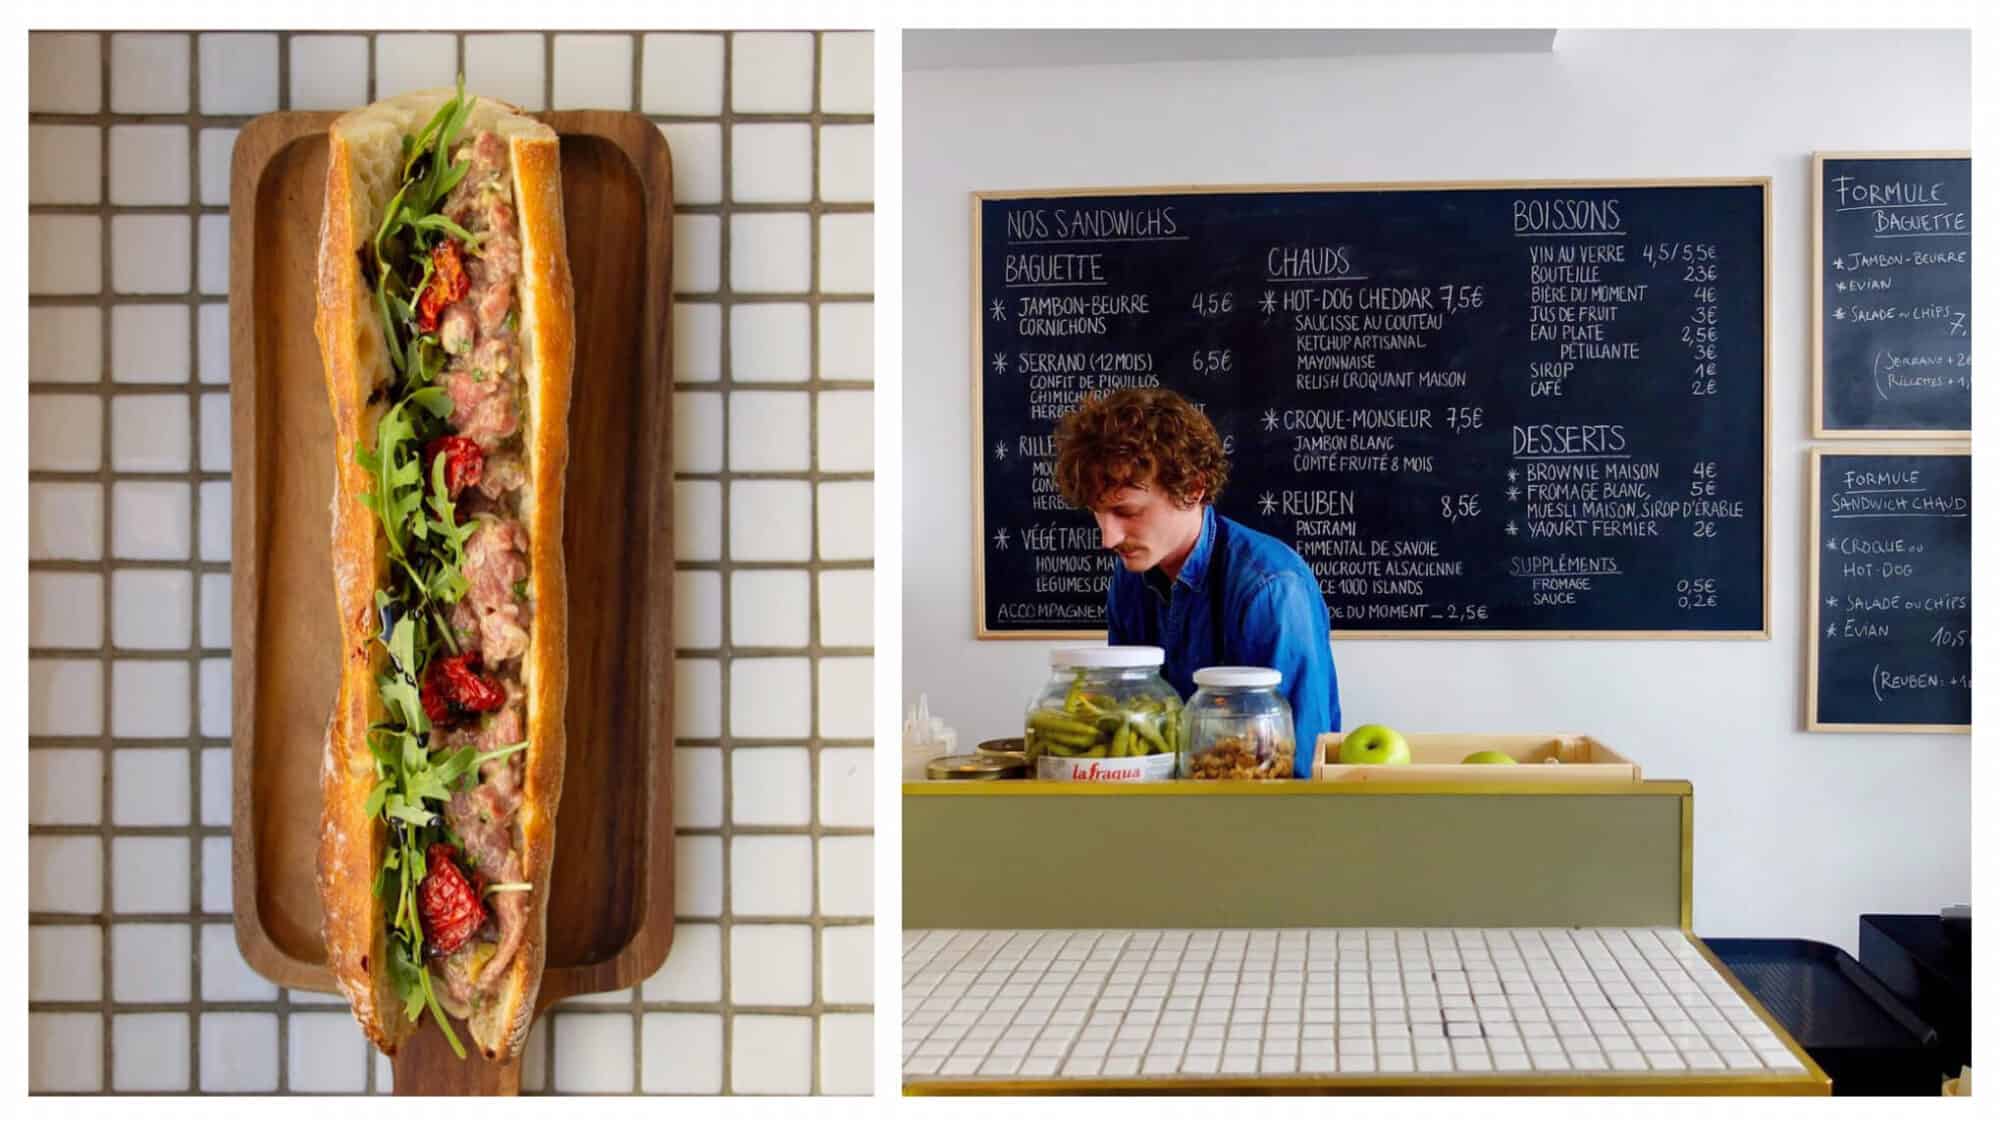 Left, a baguette sandwich in Paris. Right, sandwich counter in Paris with a blackboard in the background.